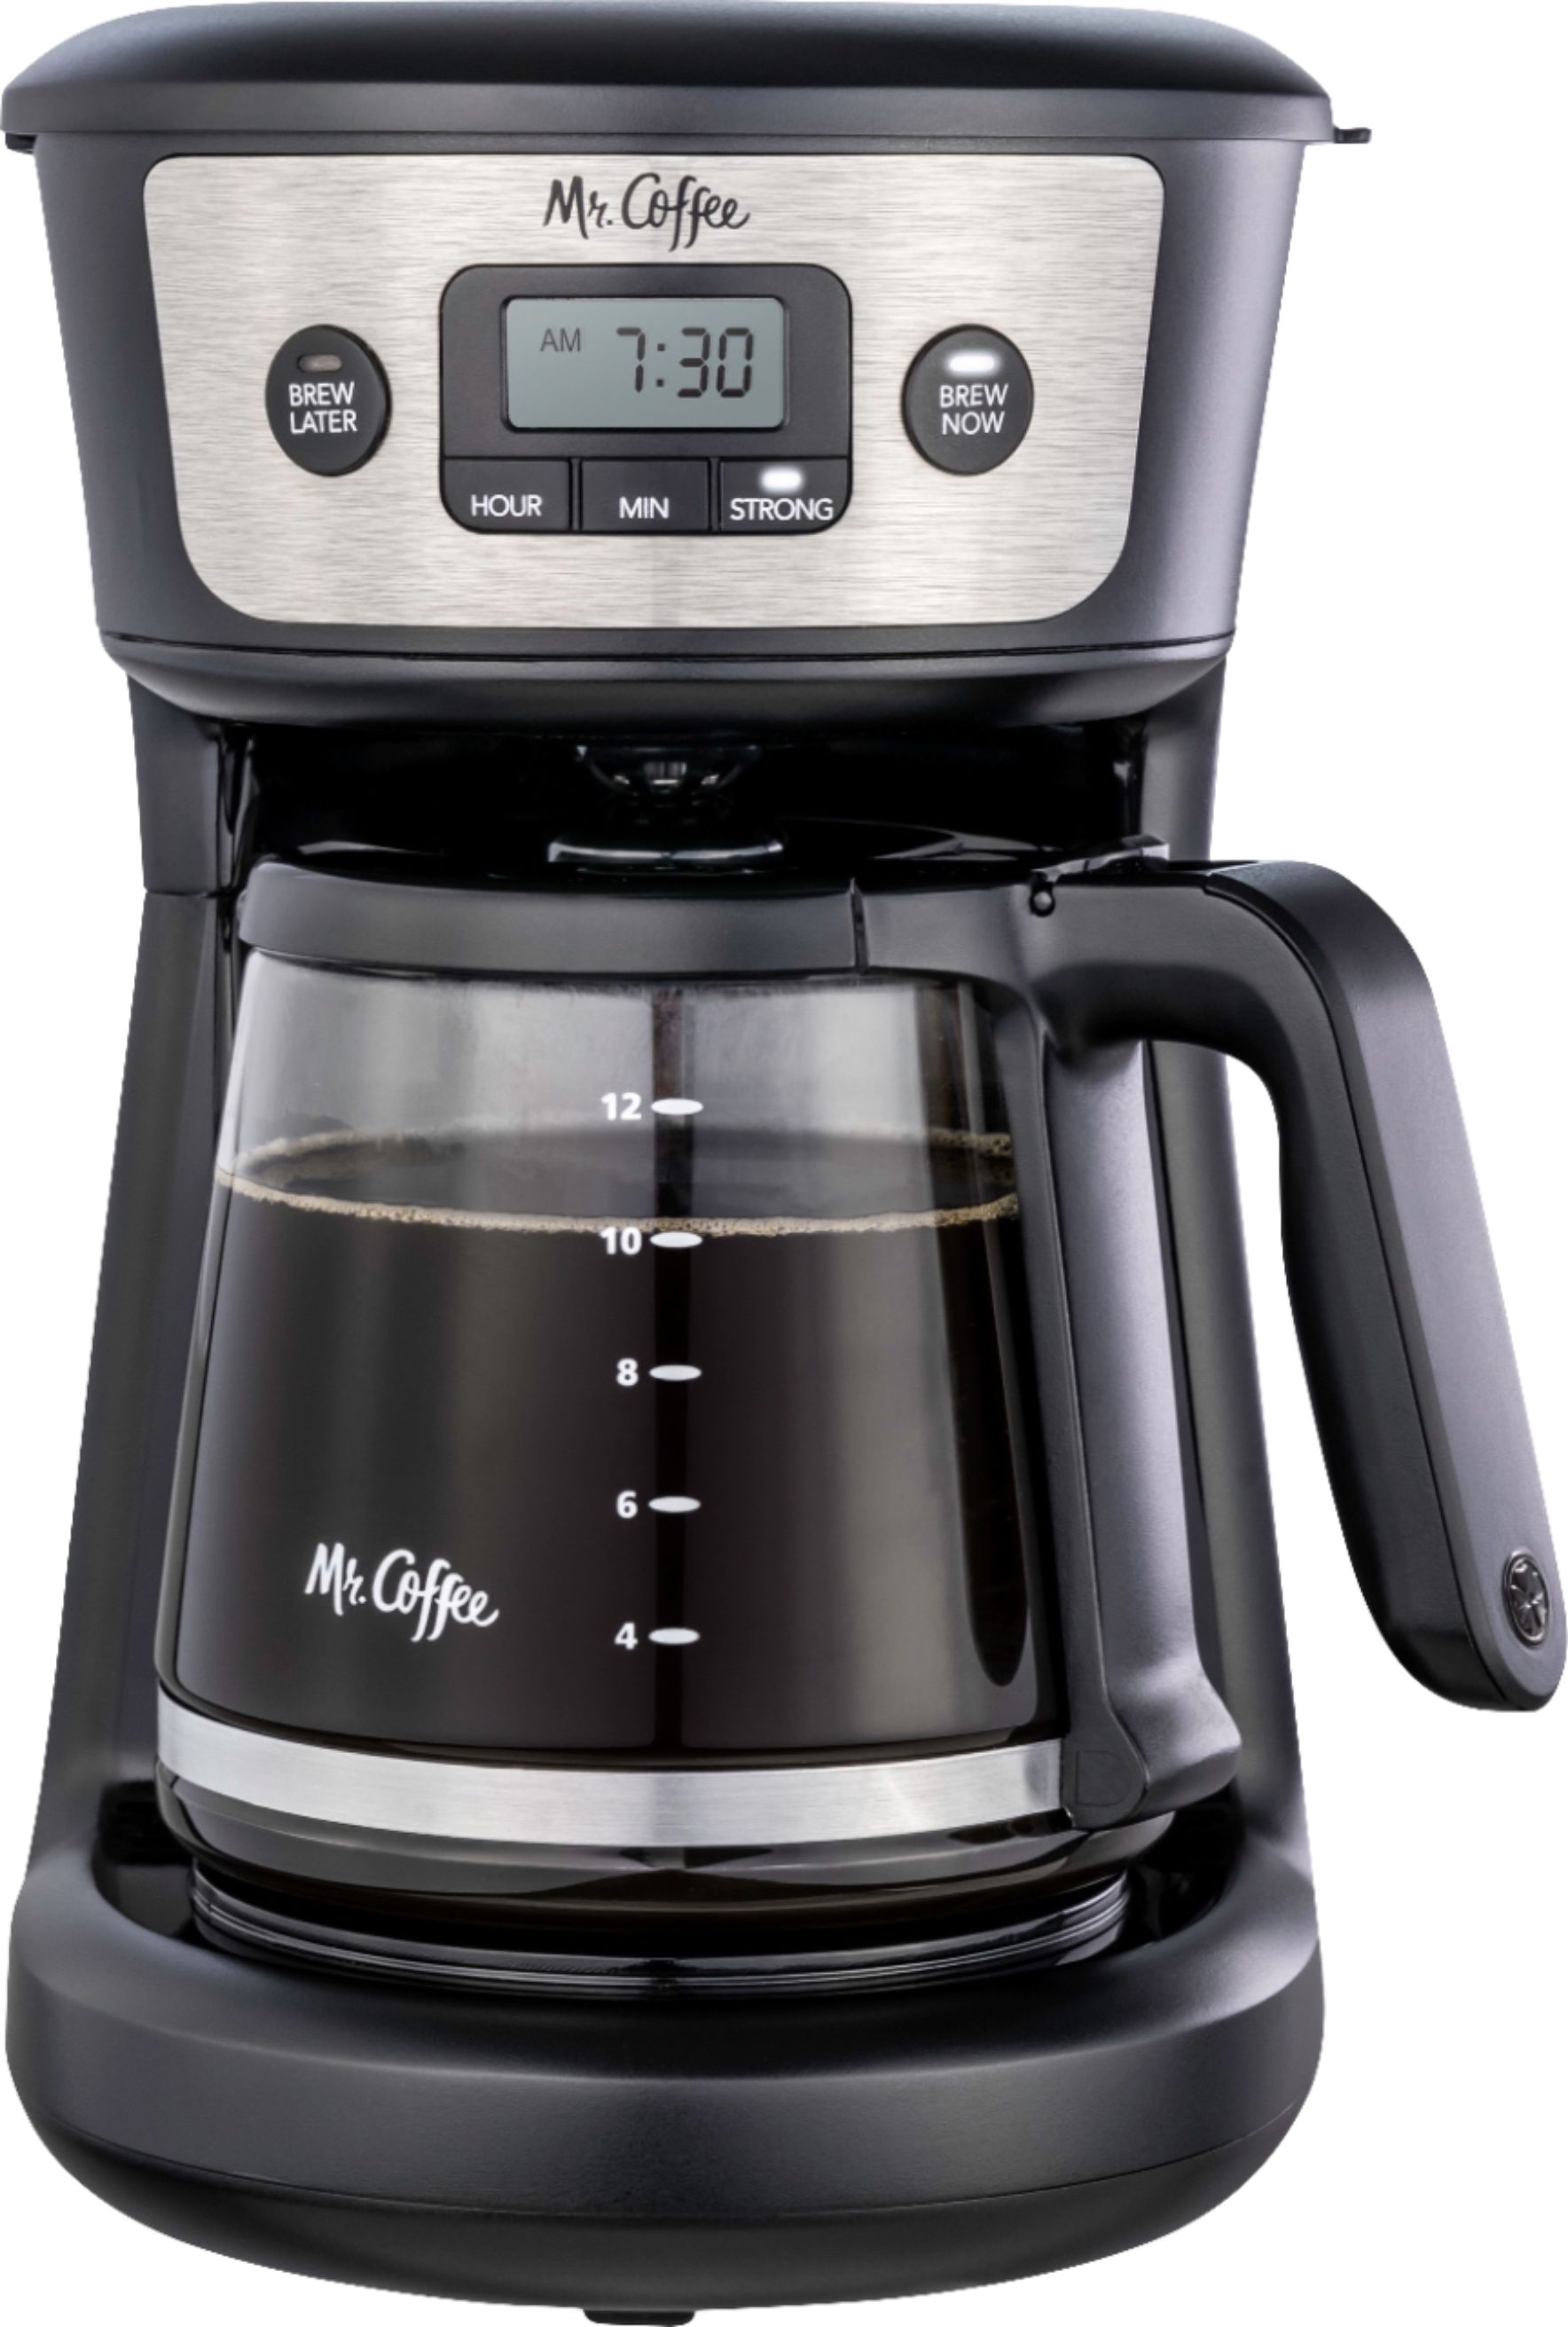 Mr. Coffee 12-Cup Coffee Maker, Strong Brew Selector  - Best Buy